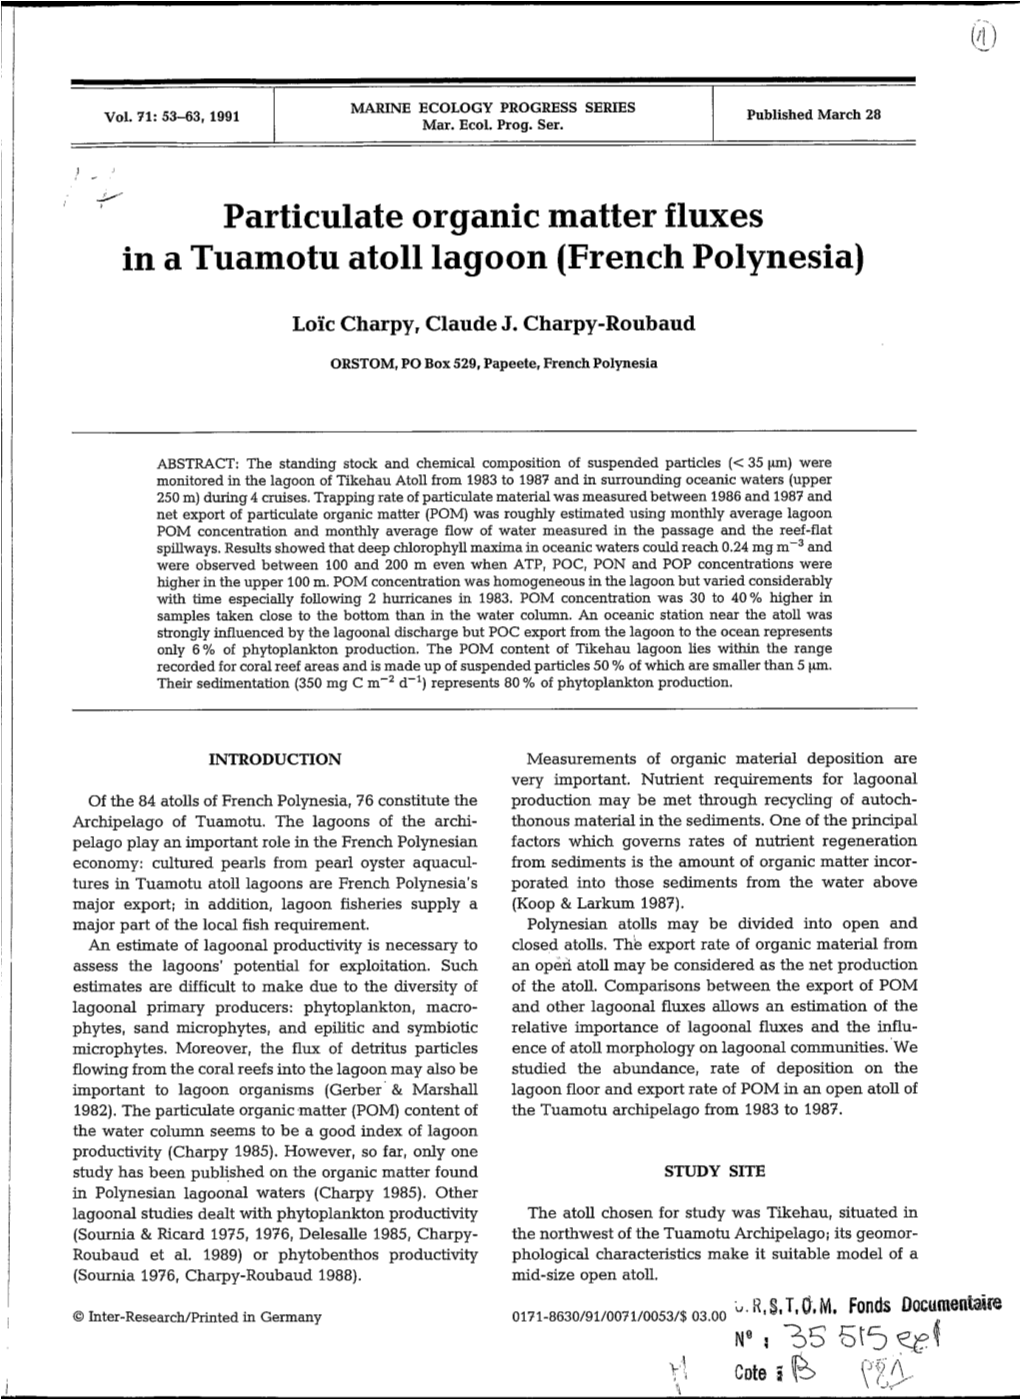 Particulate Organic Matter Fluxes in a Tuamotu Atoll Lagoon (French Polynesia)